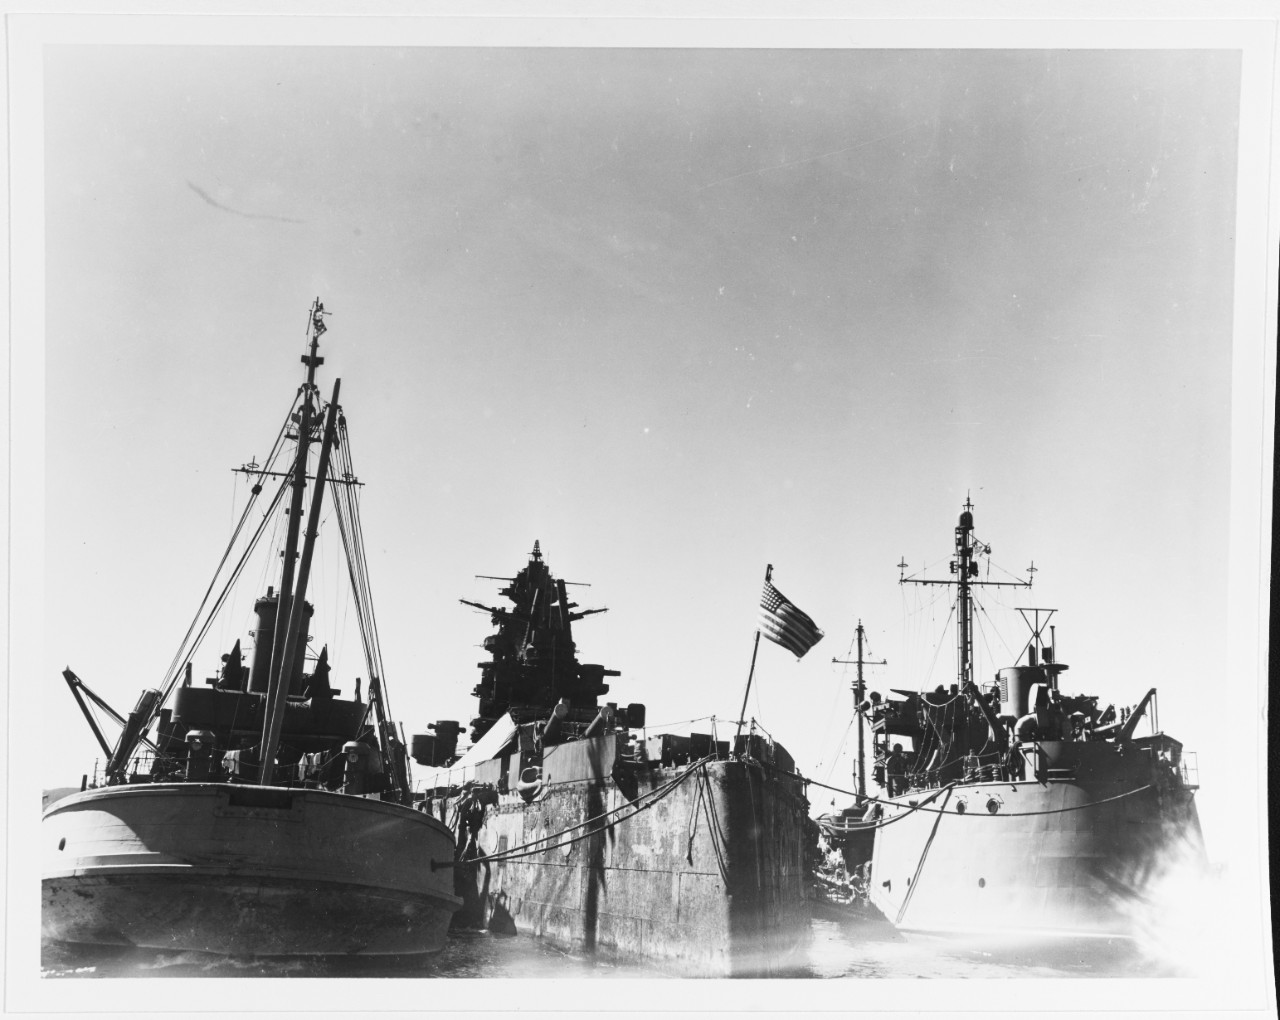 NAGATO (Japanese BB, 1919) October 12, 1945. USS ATR-35 is moored to her port side, and USS WAUPACA (AOG-46) is to starboard